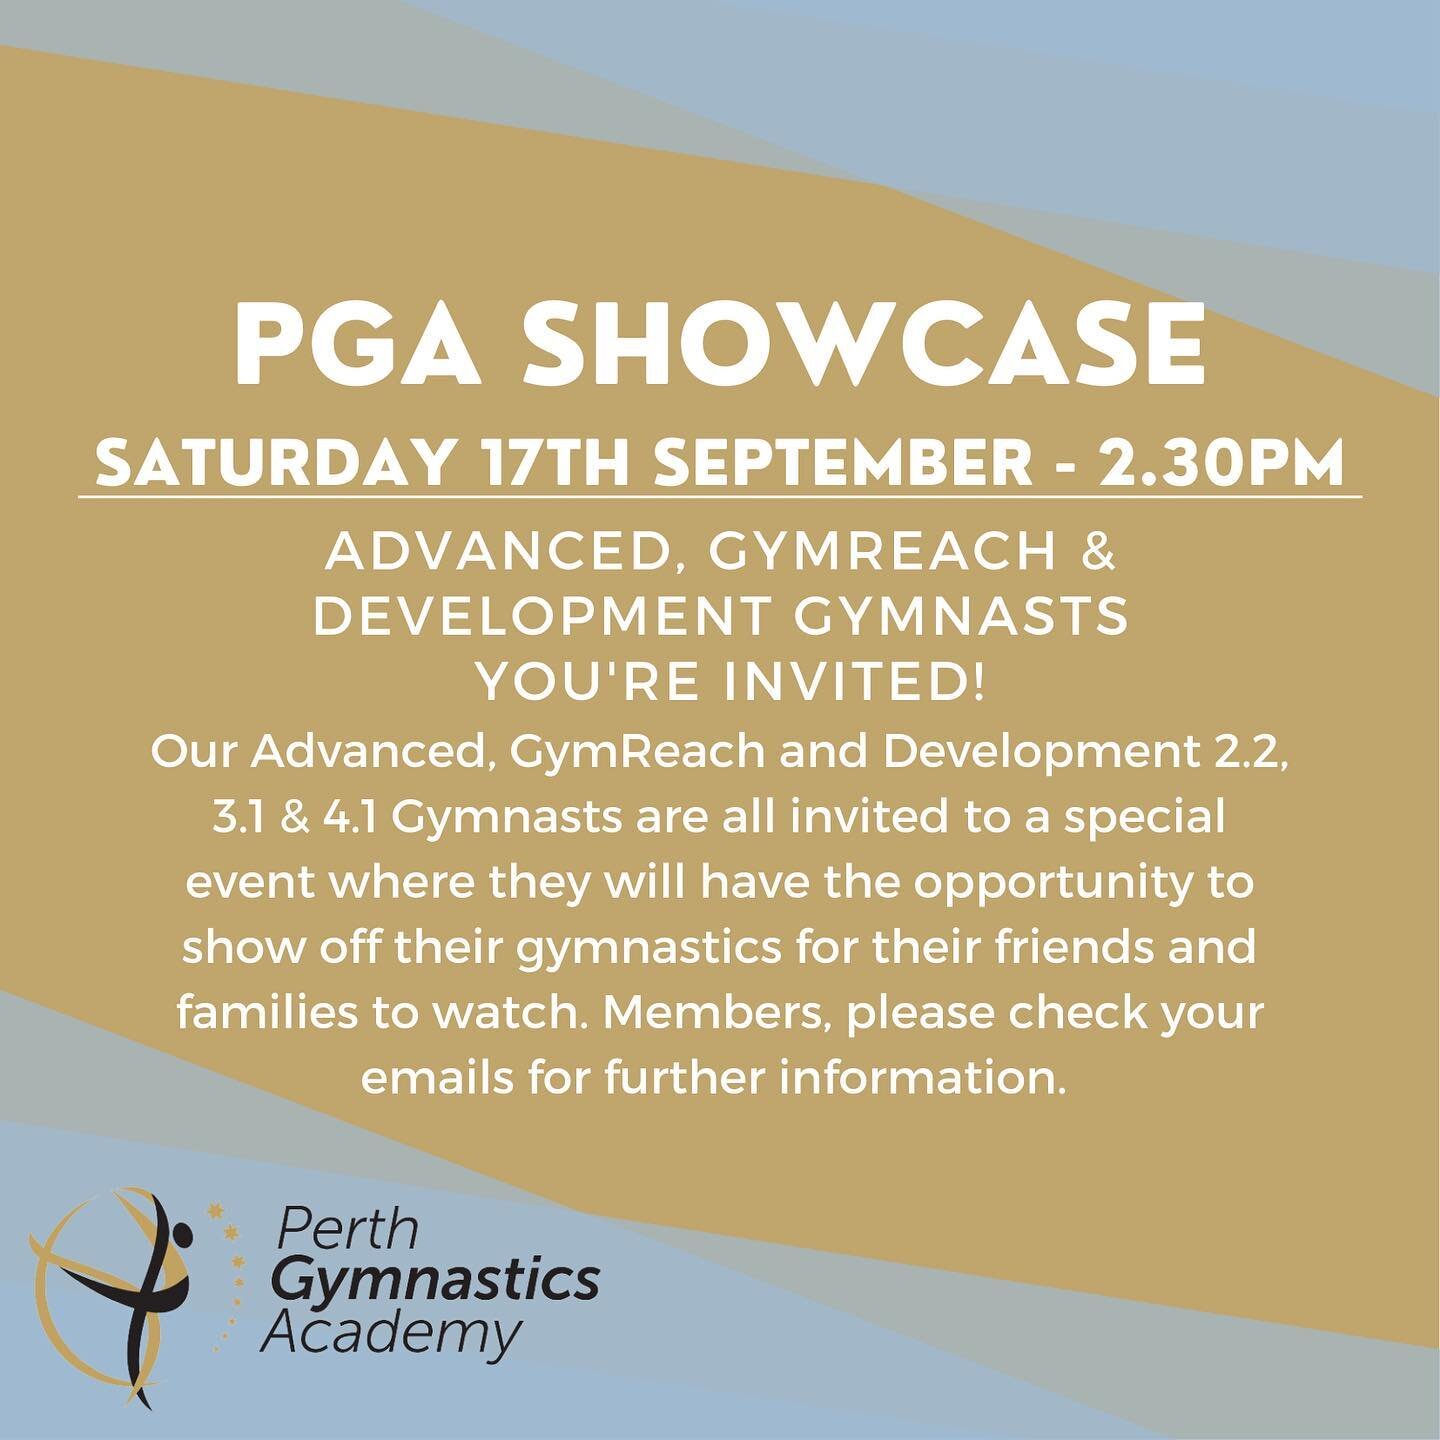 ✨PGA Showcase- Saturday 17th September from 2.30pm✨

Parents of Advanced, GymReach, Development 2.2/ 3.1 and 4.1 keep an eye out on your emails for further details. 

💙💙💙💙💙

#perthgymnasticsacademy #perthgym #perthgymnastics #pga